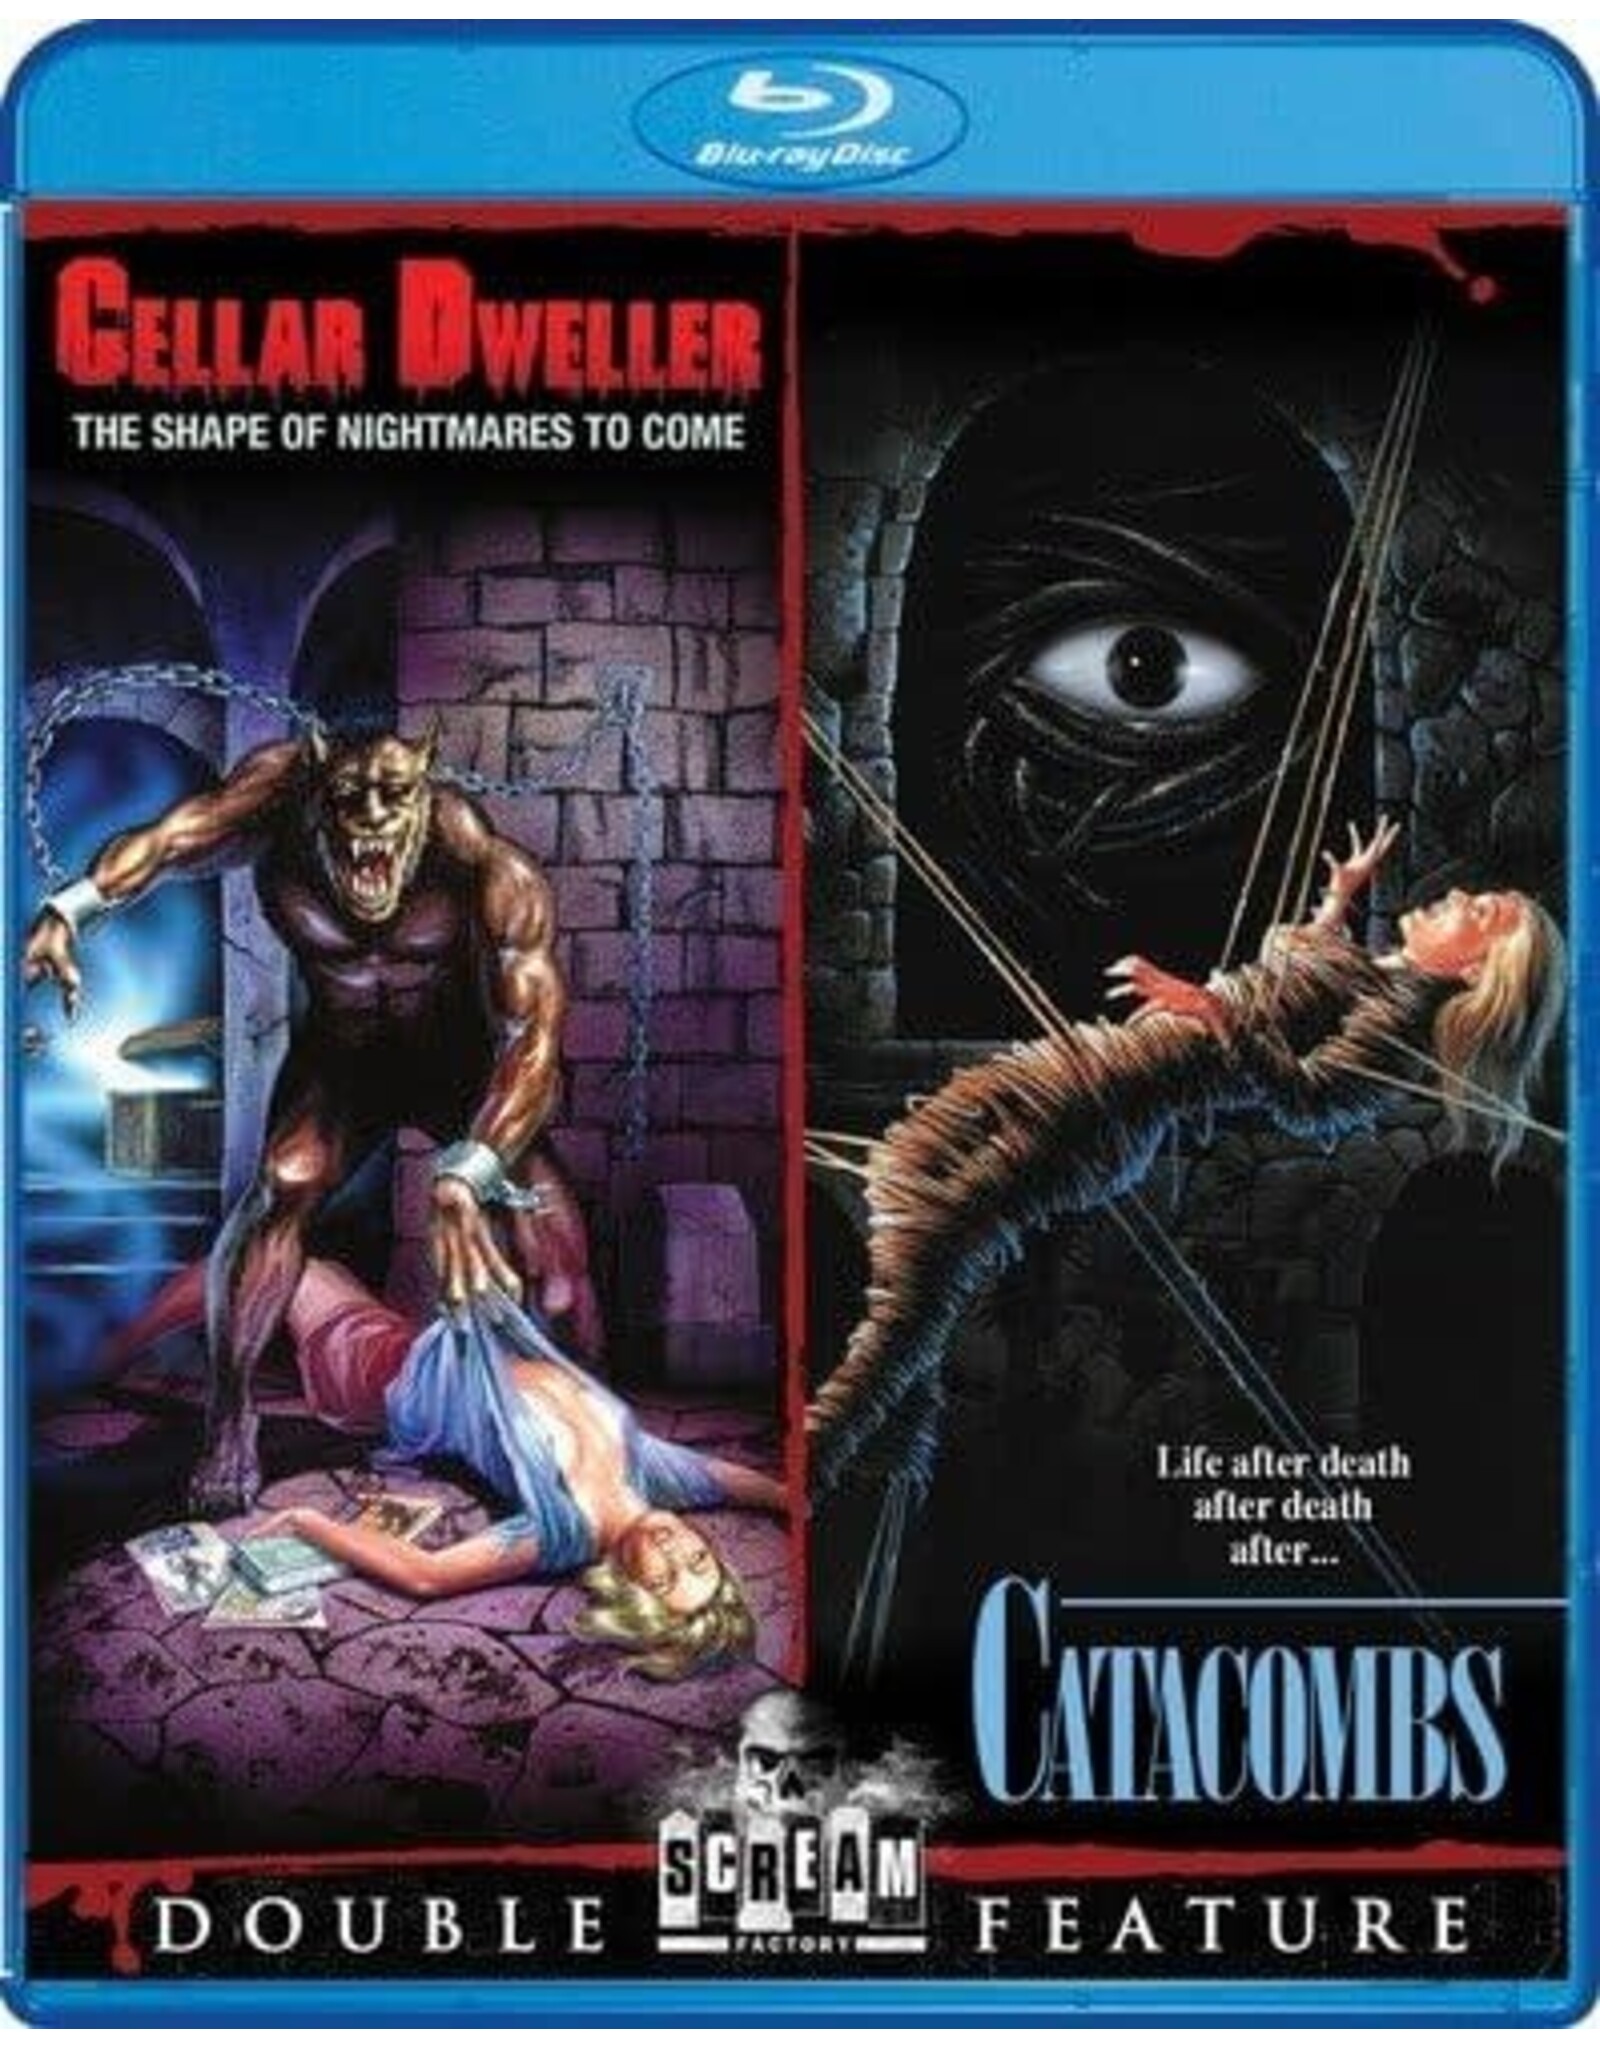 Horror Cellar Dweller / Catacombs Double Feature - Scream Factory (Brand New)